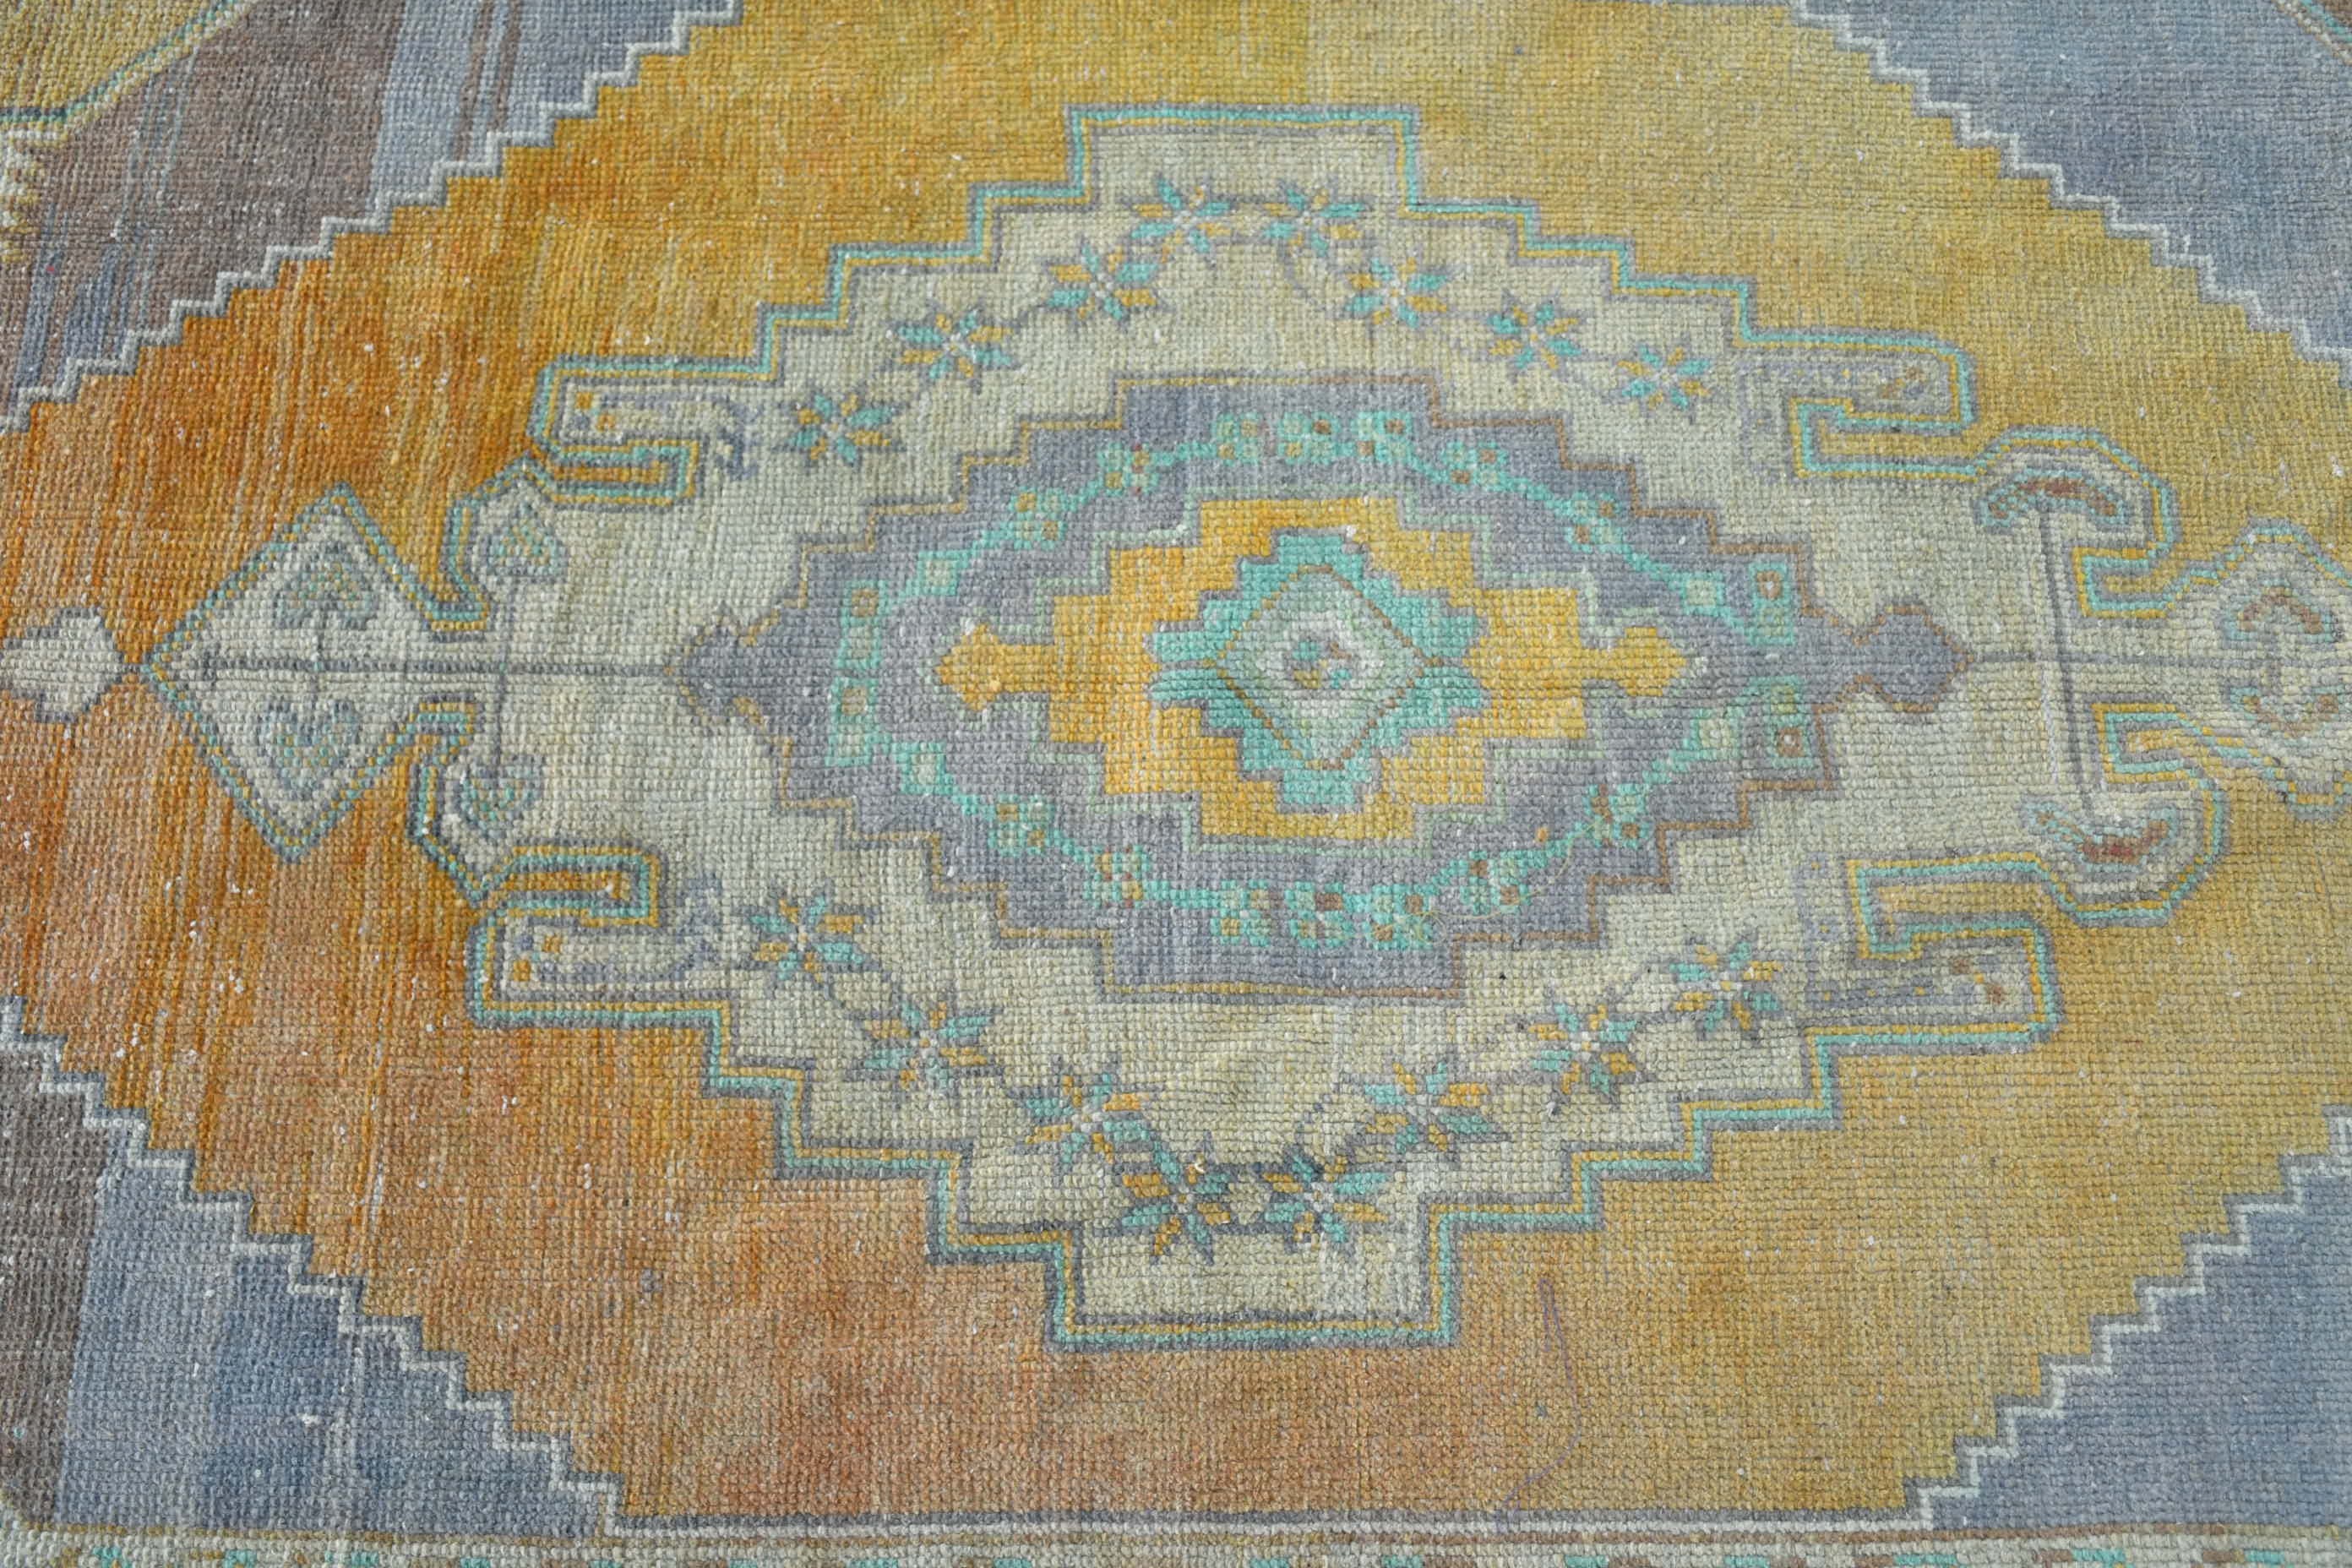 Bedroom Rug, Rugs for Bedroom, Antique Rug, Turkish Rugs, Vintage Rug, Yellow Oriental Rug, Kitchen Rug, Entry Rug, 2.8x5.4 ft Accent Rugs